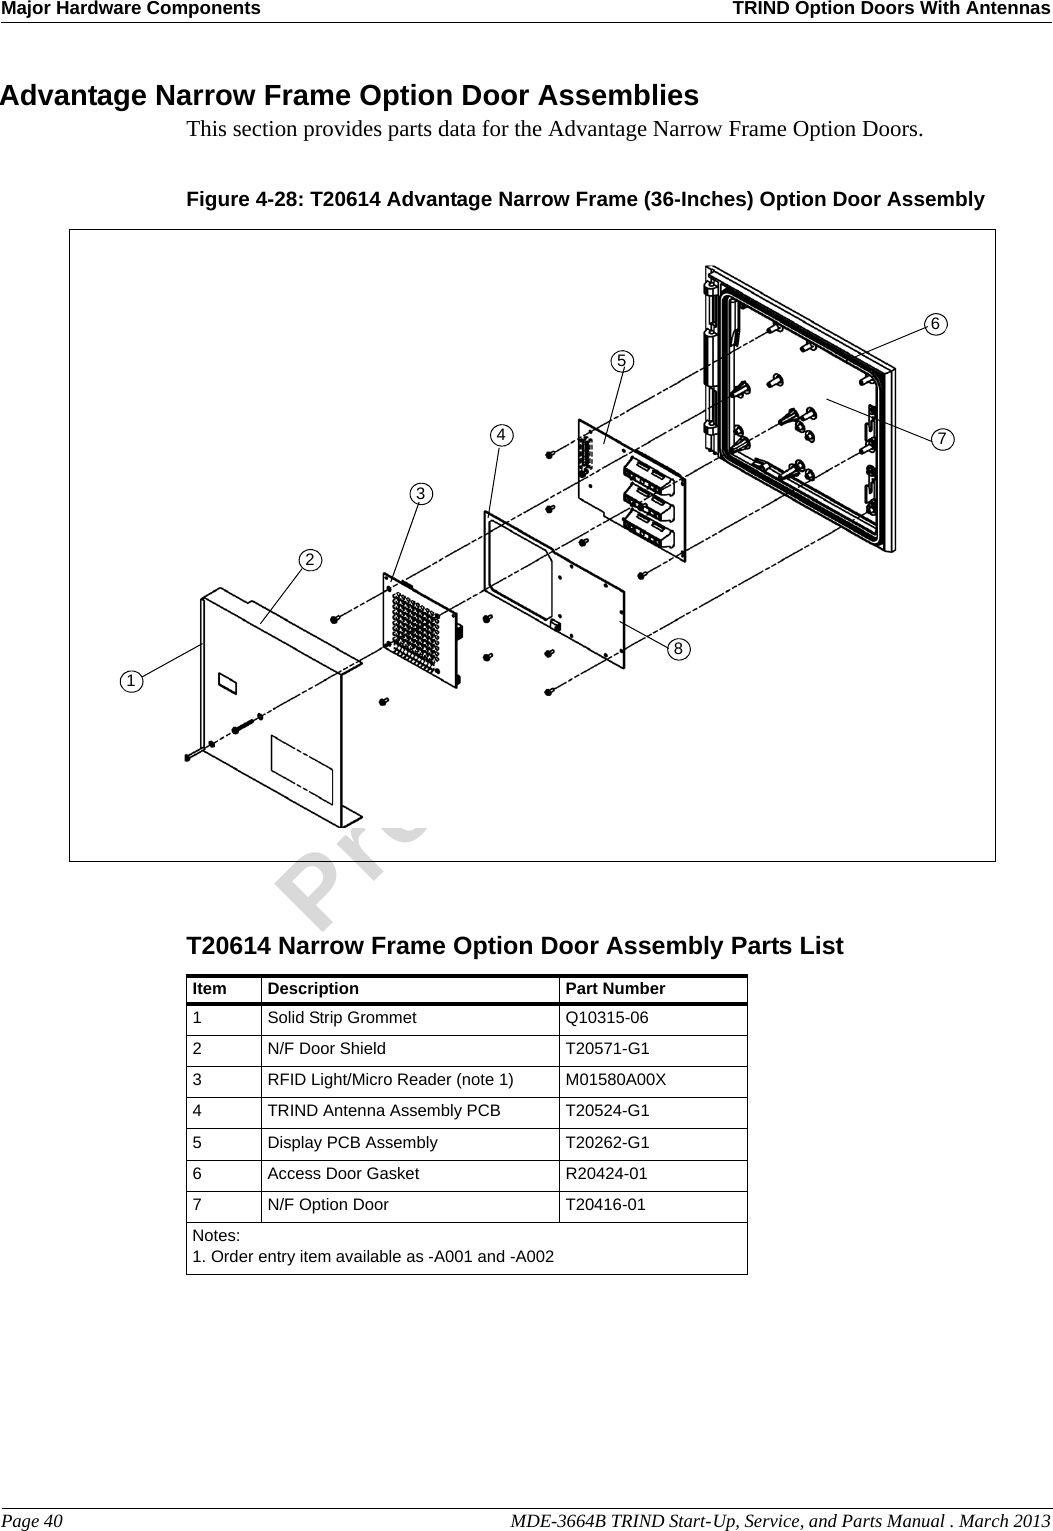 Major Hardware Components TRIND Option Doors With AntennasPage 40                                                                                                  MDE-3664B TRIND Start-Up, Service, and Parts Manual . March 2013PreliminaryAdvantage Narrow Frame Option Door AssembliesThis section provides parts data for the Advantage Narrow Frame Option Doors.Figure 4-28: T20614 Advantage Narrow Frame (36-Inches) Option Door Assembly67524318T20614 Narrow Frame Option Door Assembly Parts ListItem Description Part Number1Solid Strip Grommet Q10315-062N/F Door Shield T20571-G13RFID Light/Micro Reader (note 1) M01580A00X4TRIND Antenna Assembly PCB T20524-G15Display PCB Assembly T20262-G16Access Door Gasket R20424-017N/F Option Door T20416-01Notes:1. Order entry item available as -A001 and -A002